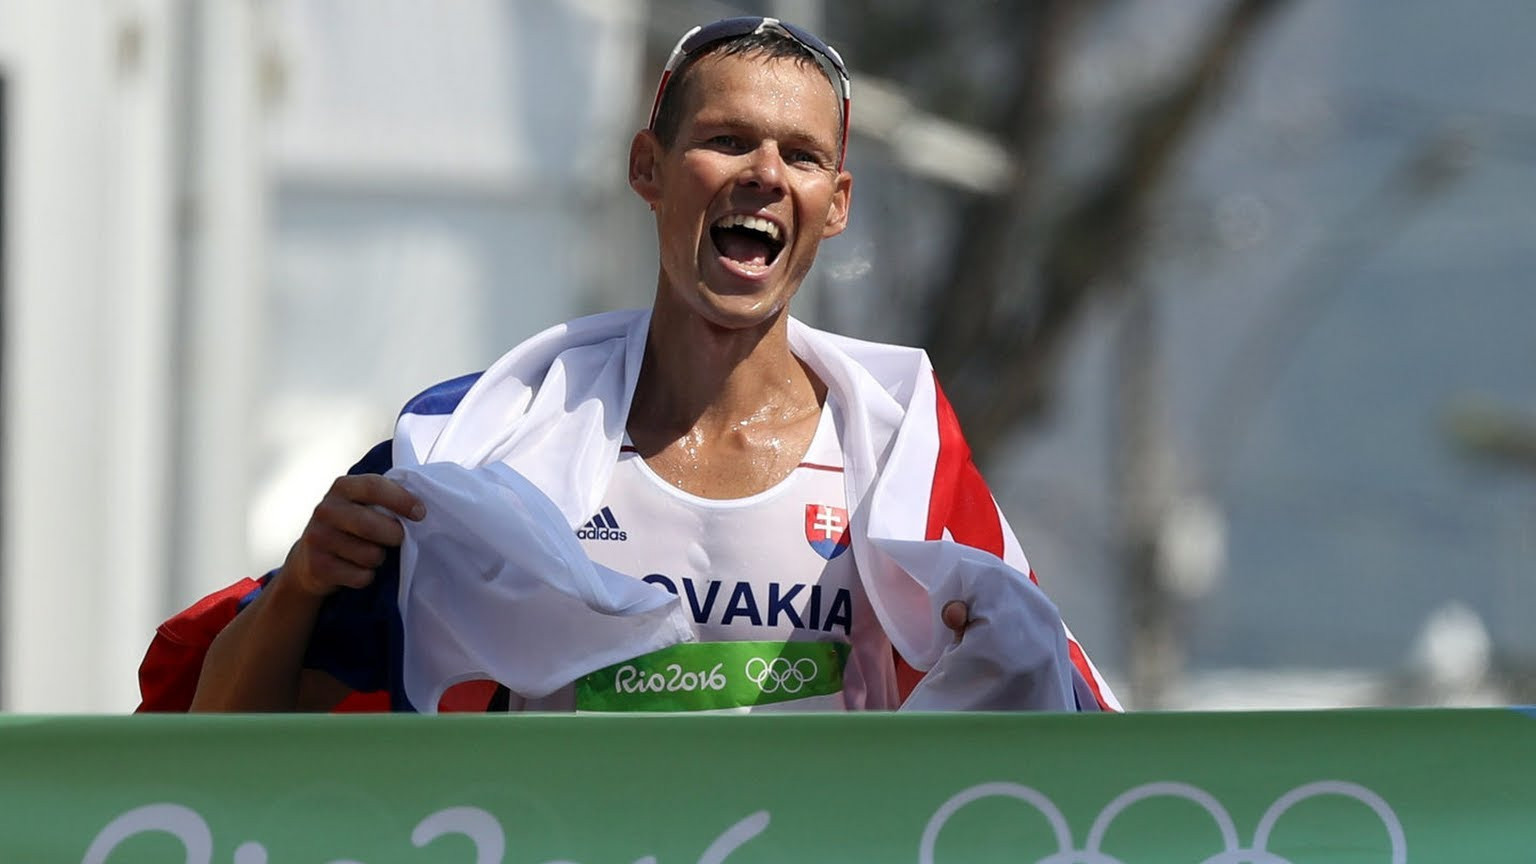 Matej Tóth was the first Slovakian to claim an Olympic medal in athletics when he won the 50km race walk at Rio 2016 ©YouTube